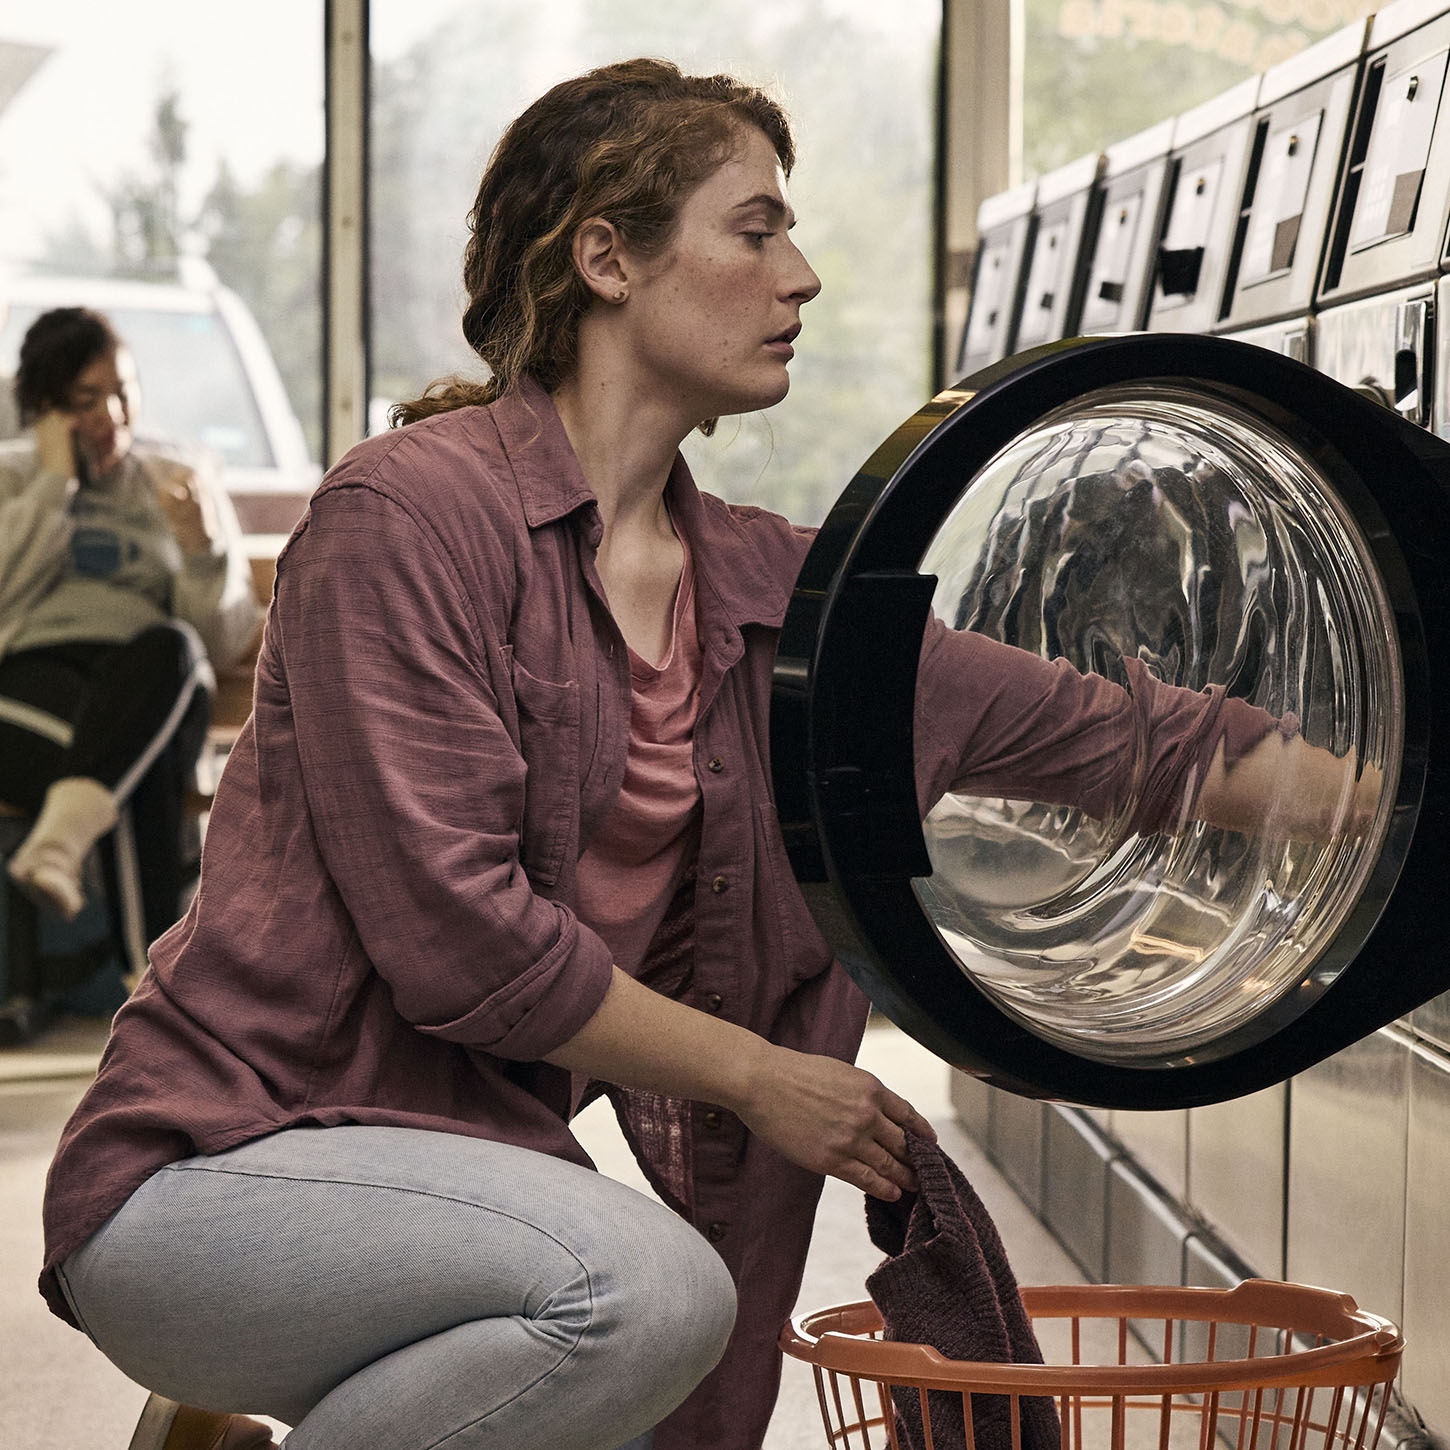 woman taking laundry out of machine at laundromat